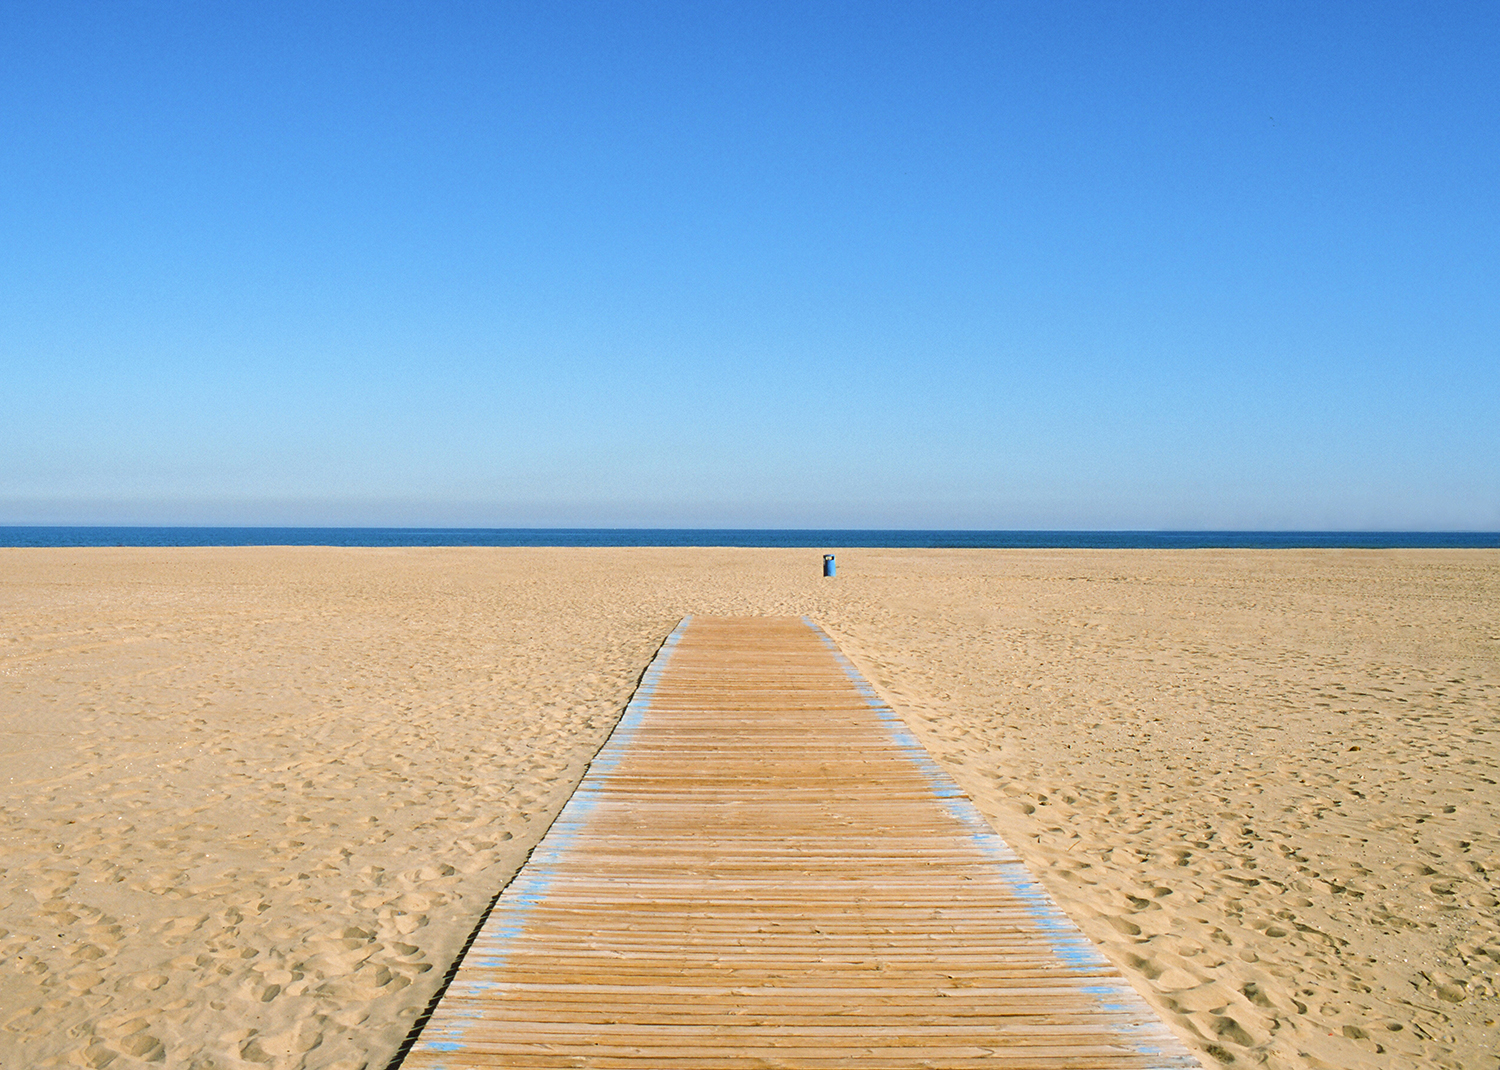 Scene of sea, sky and empty beach with soft sand, wooden pathway and waste container